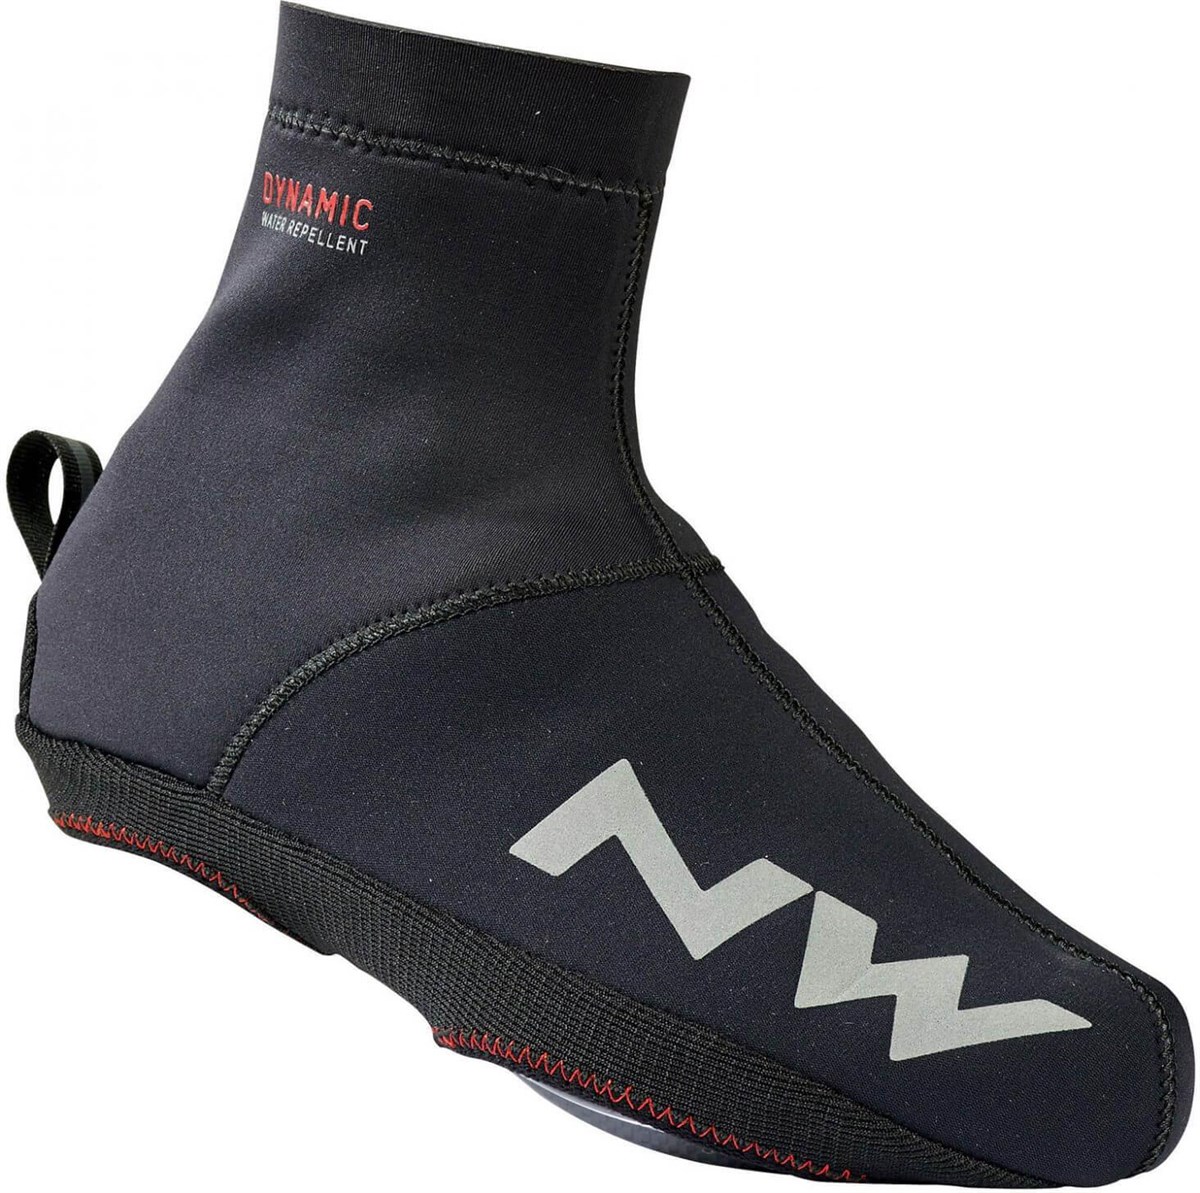 Northwave Dynamic Winter Shoe Covers product image